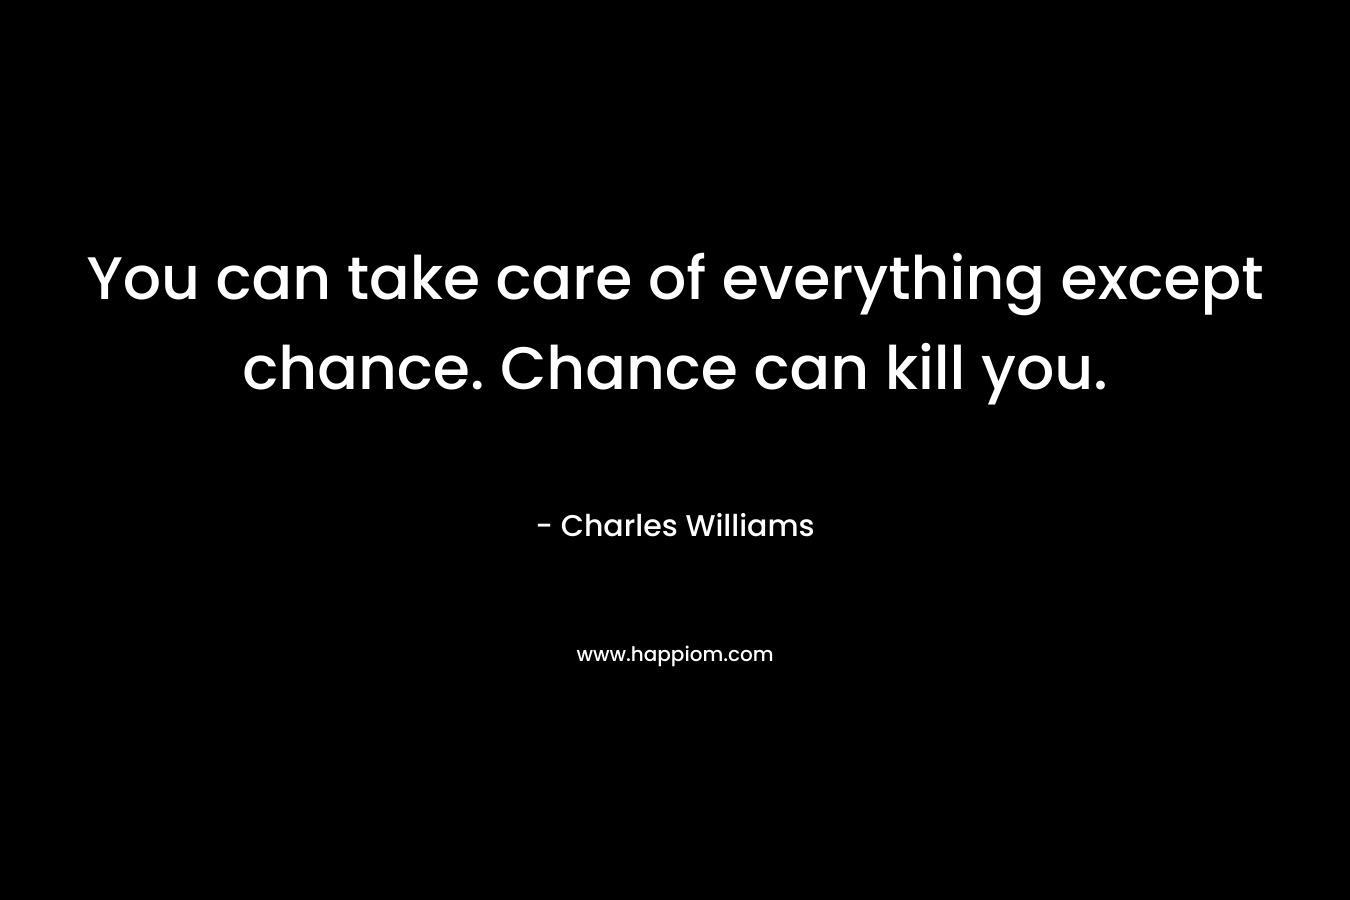 You can take care of everything except chance. Chance can kill you.